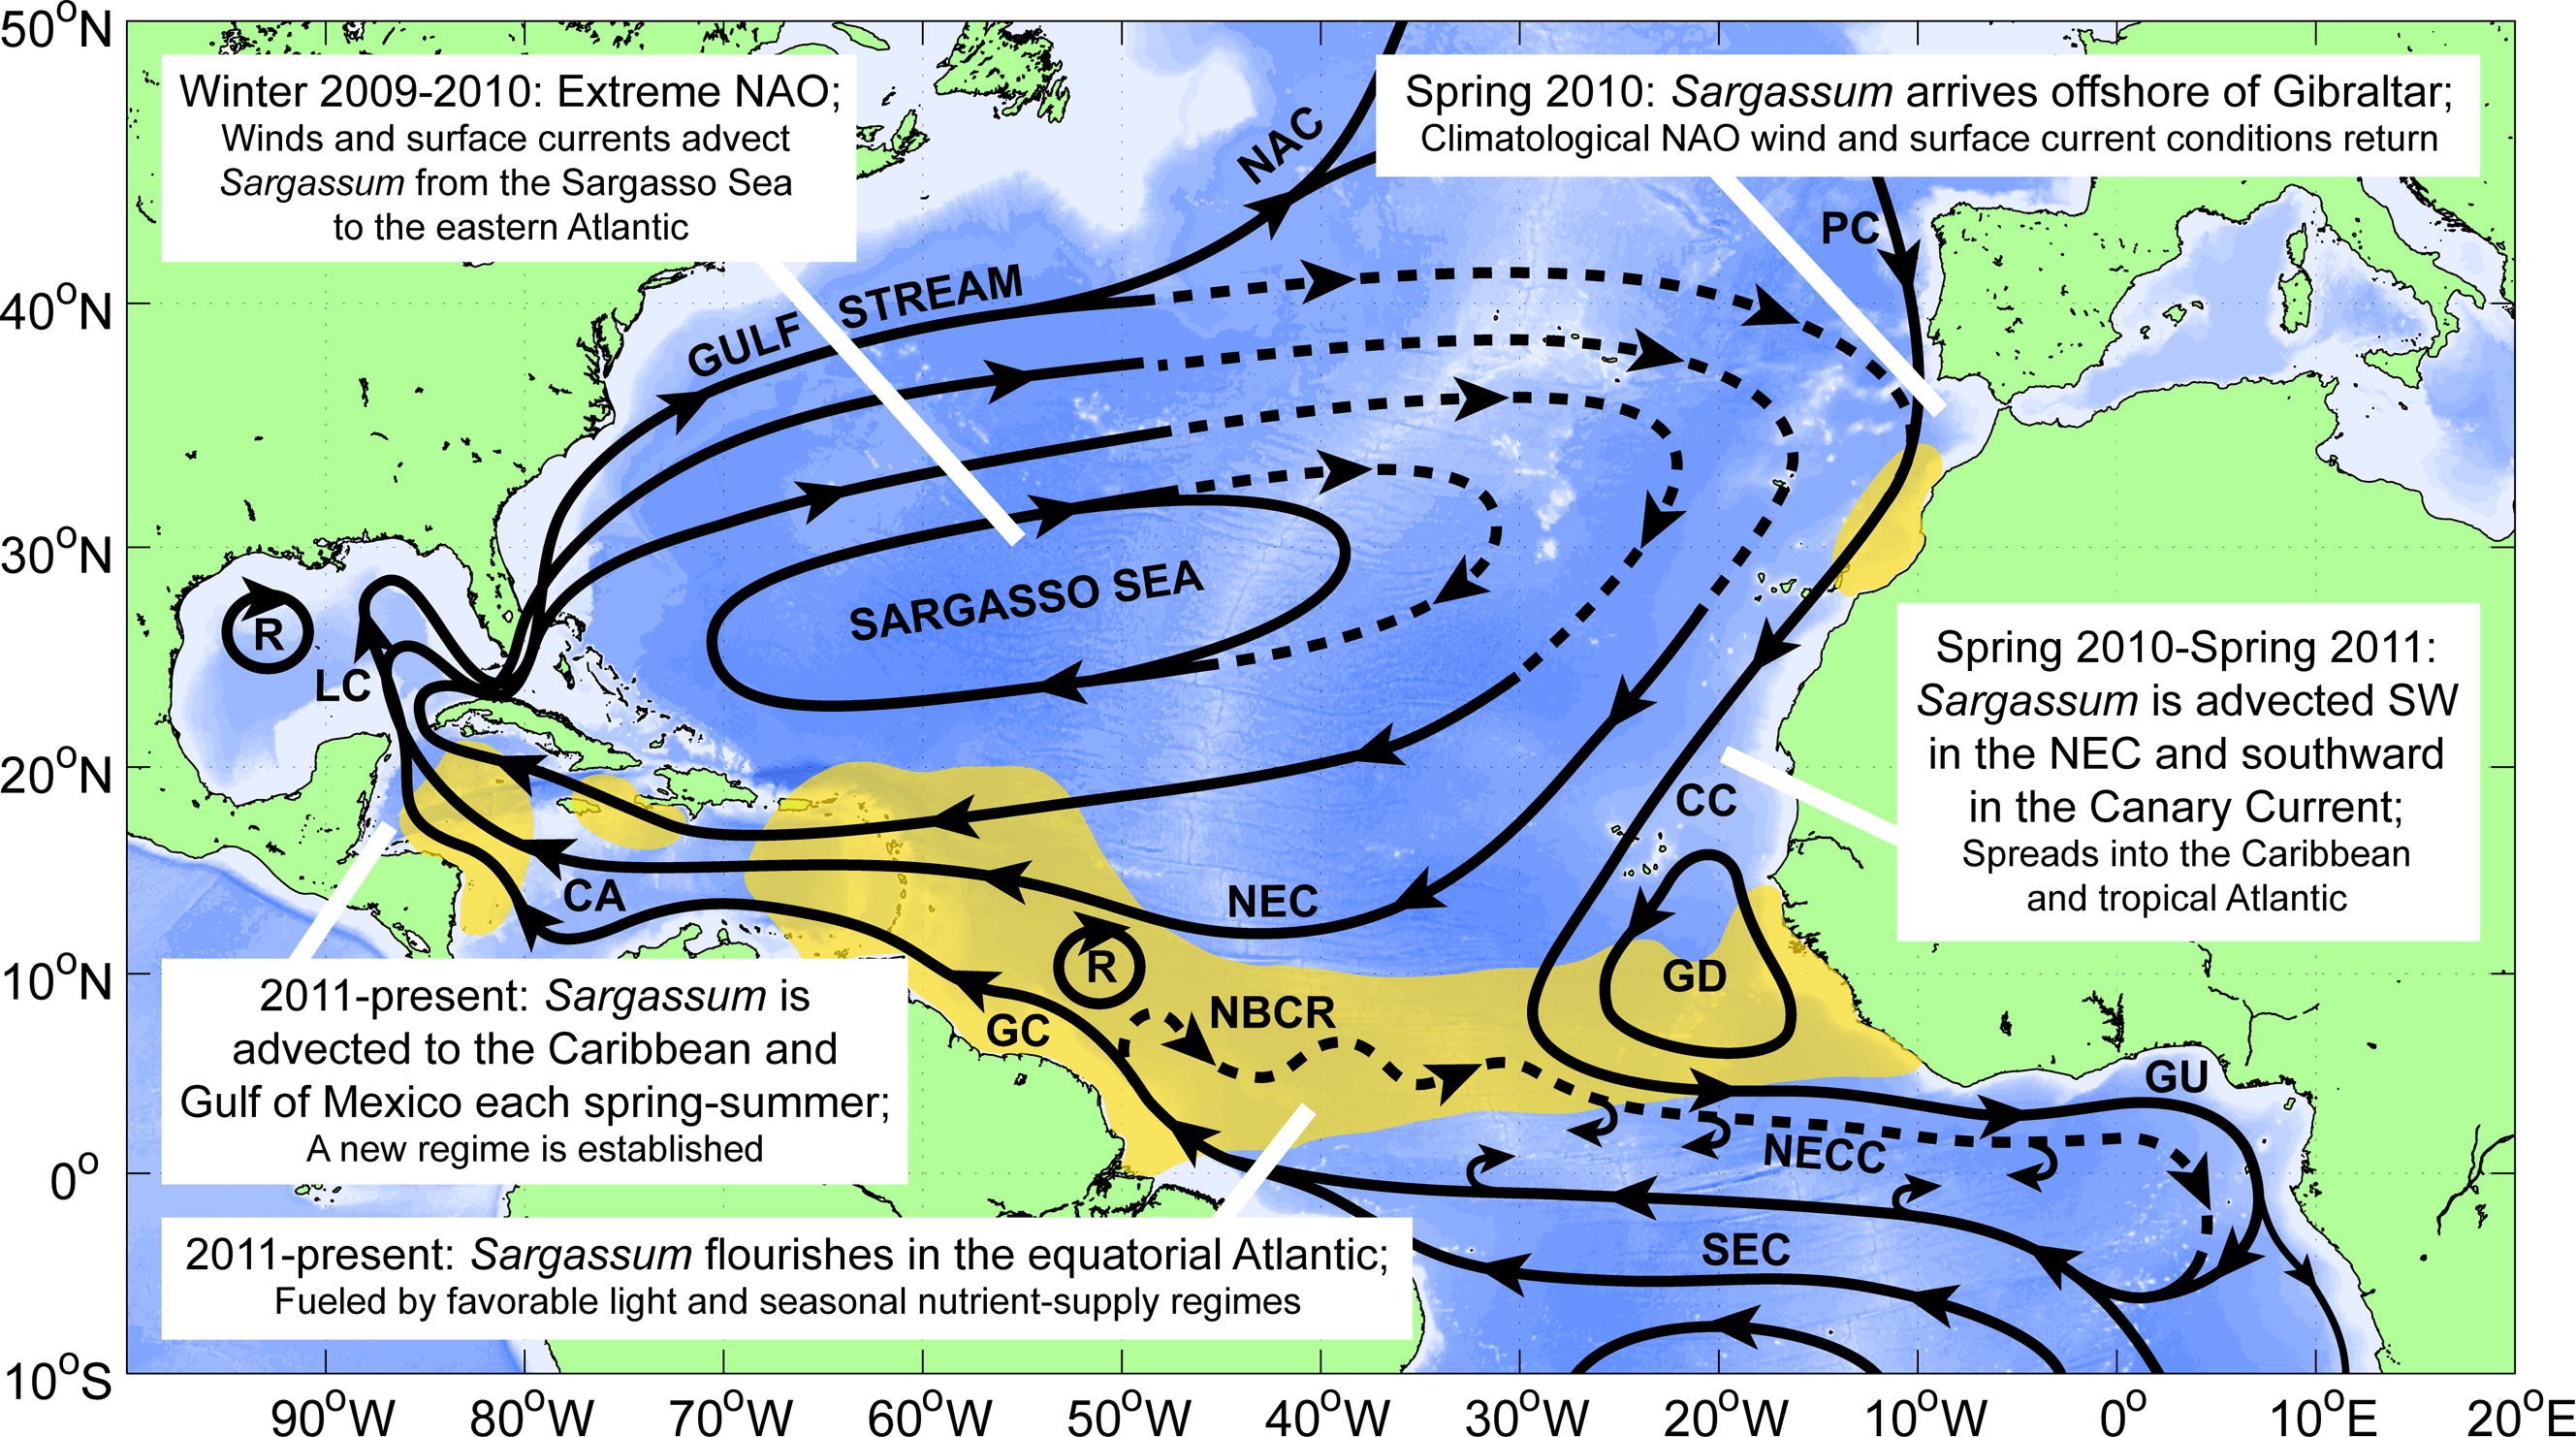 This map shows the pathway by which Sargassum exits the Sargasso Sea and makes it's way to the tropical Atlantic and Caribbean Sea. Blue economy